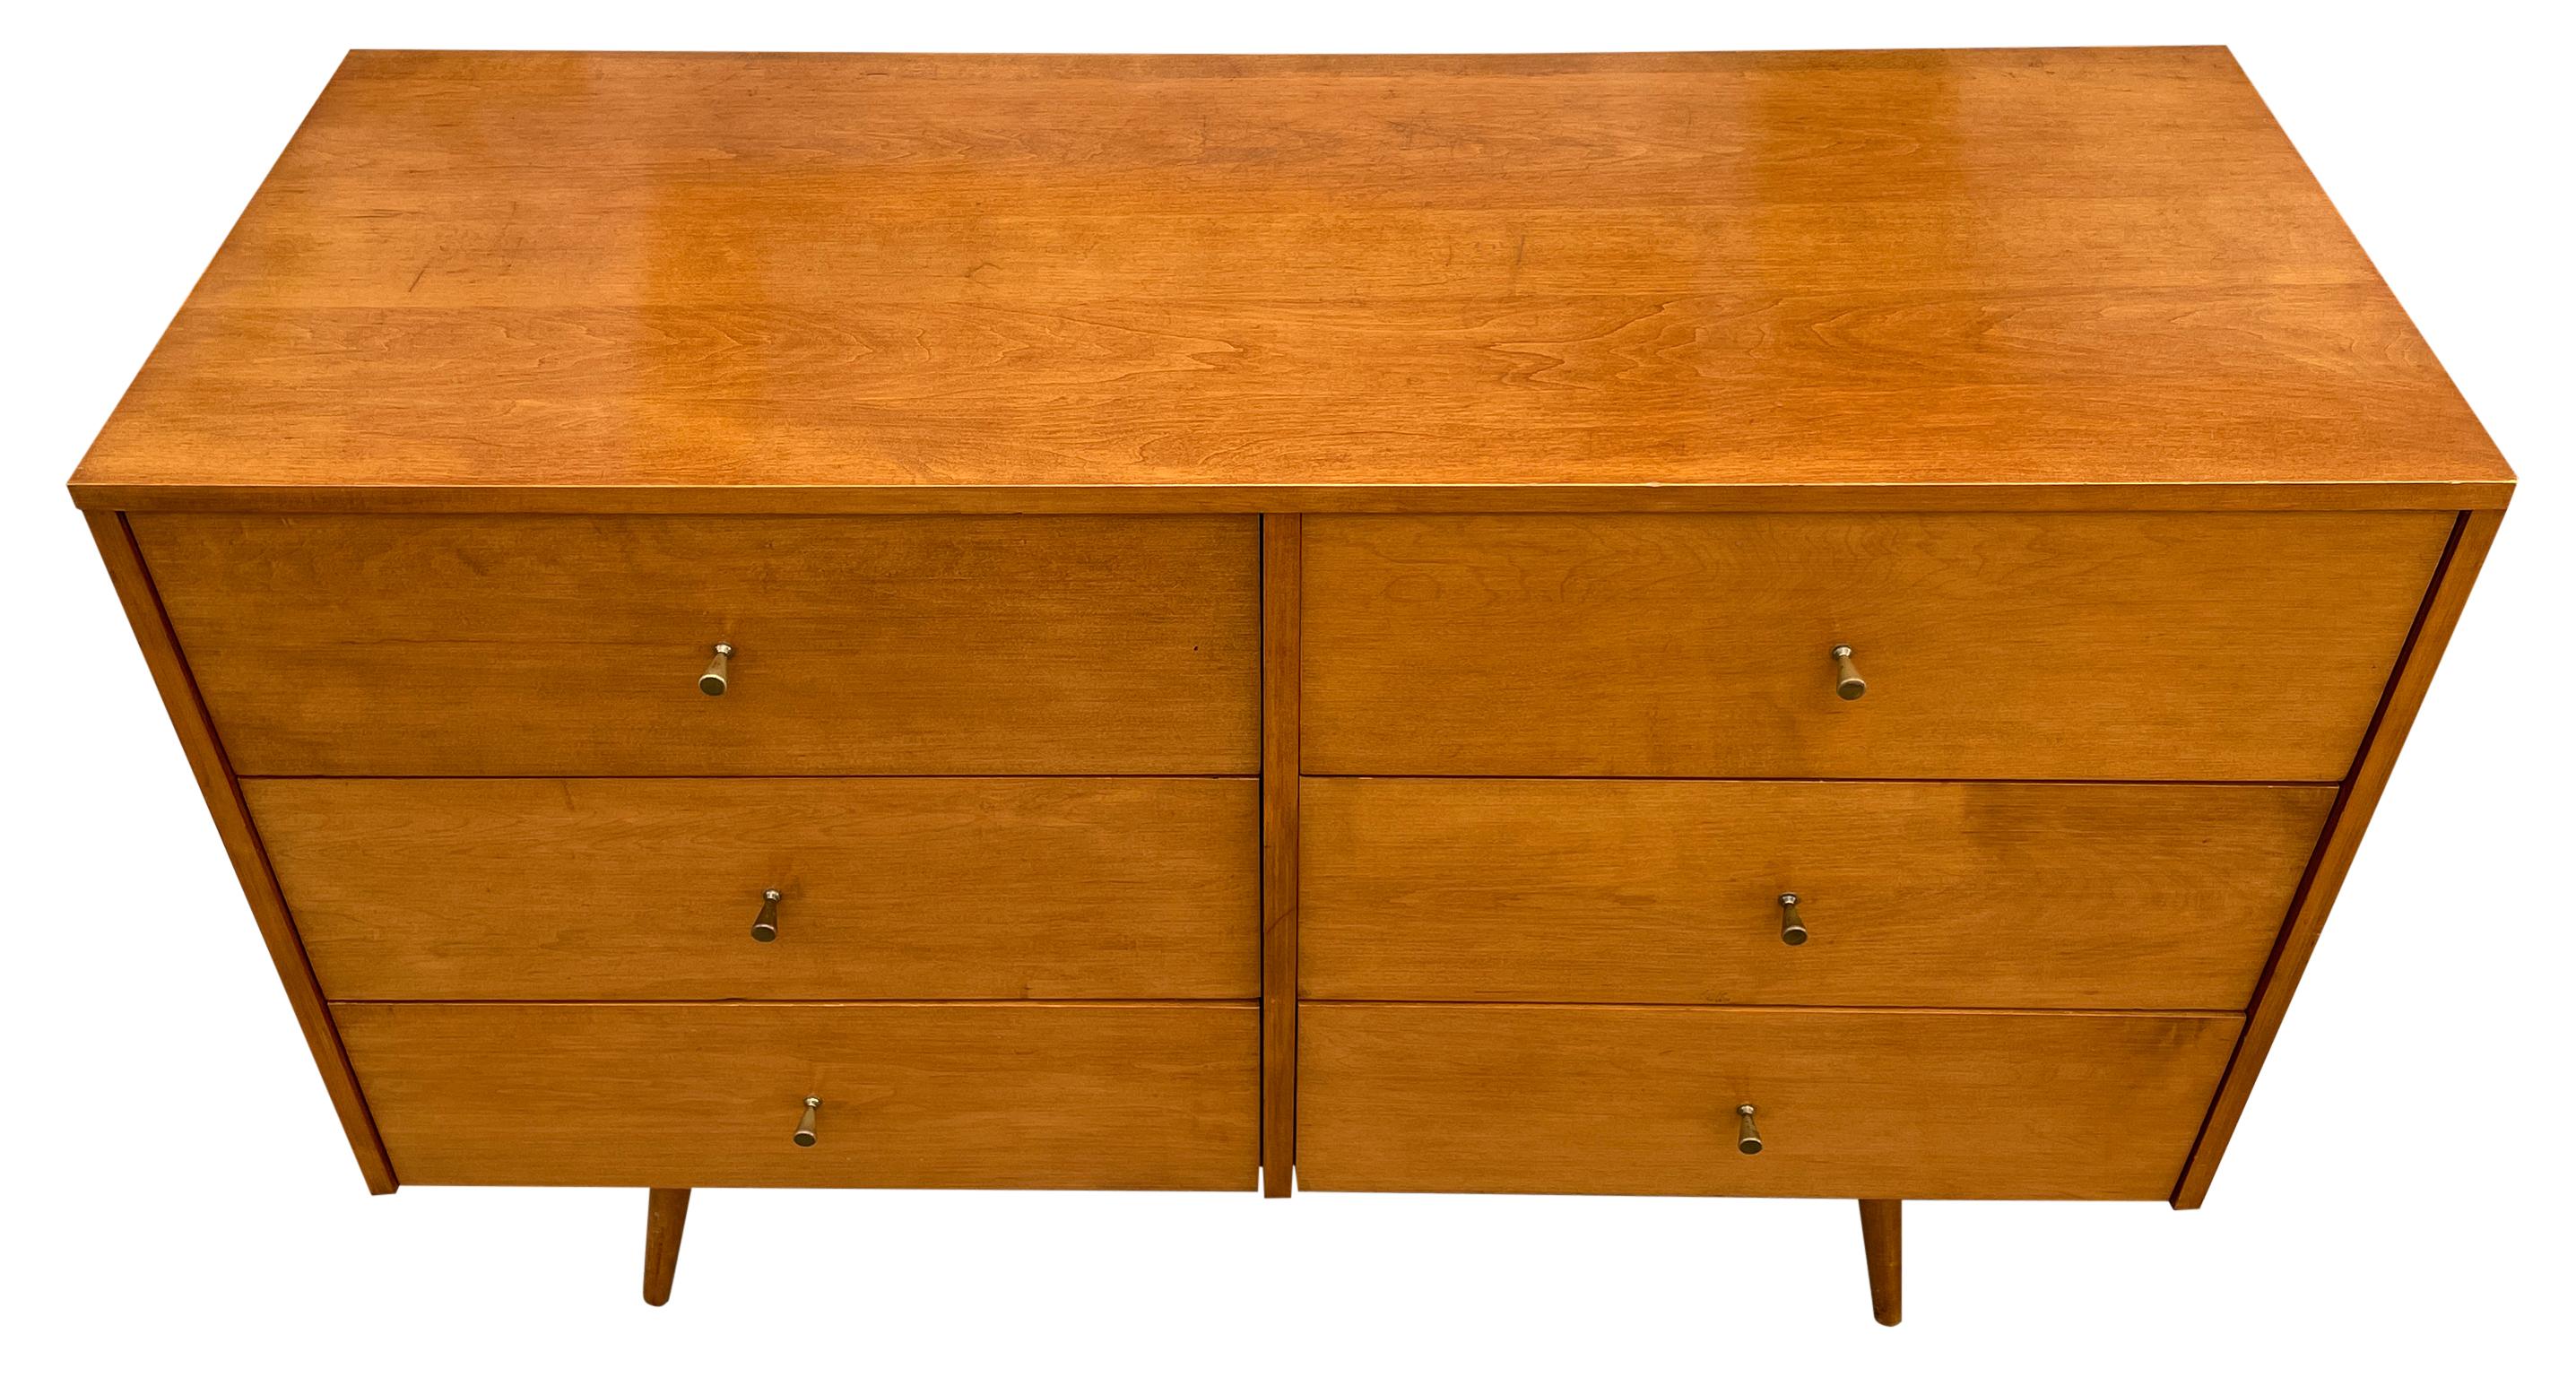 Vintage midcentury super clean Paul McCobb six-drawer dresser credenza Planner Group #1509. Beautiful dresser by Paul McCobb circa 1950s Planner Group, Six drawer, solid maple, Original Brass knob pulls. Sits on 4 Solid maple tapered legs. Clean